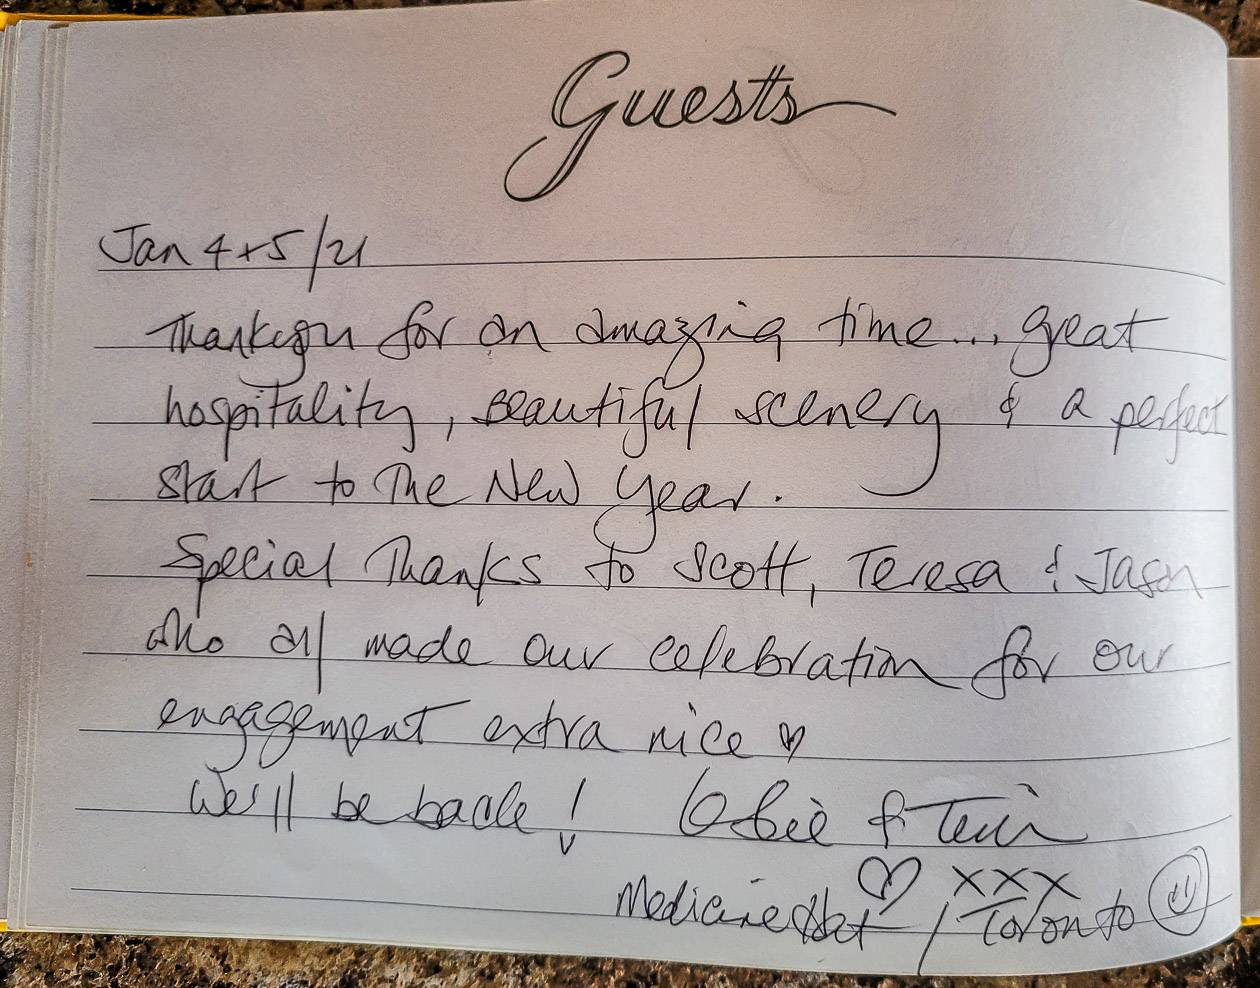 The guest book was filled with entries from guests who had enjoyed wonderful hospitality and had an amazing time